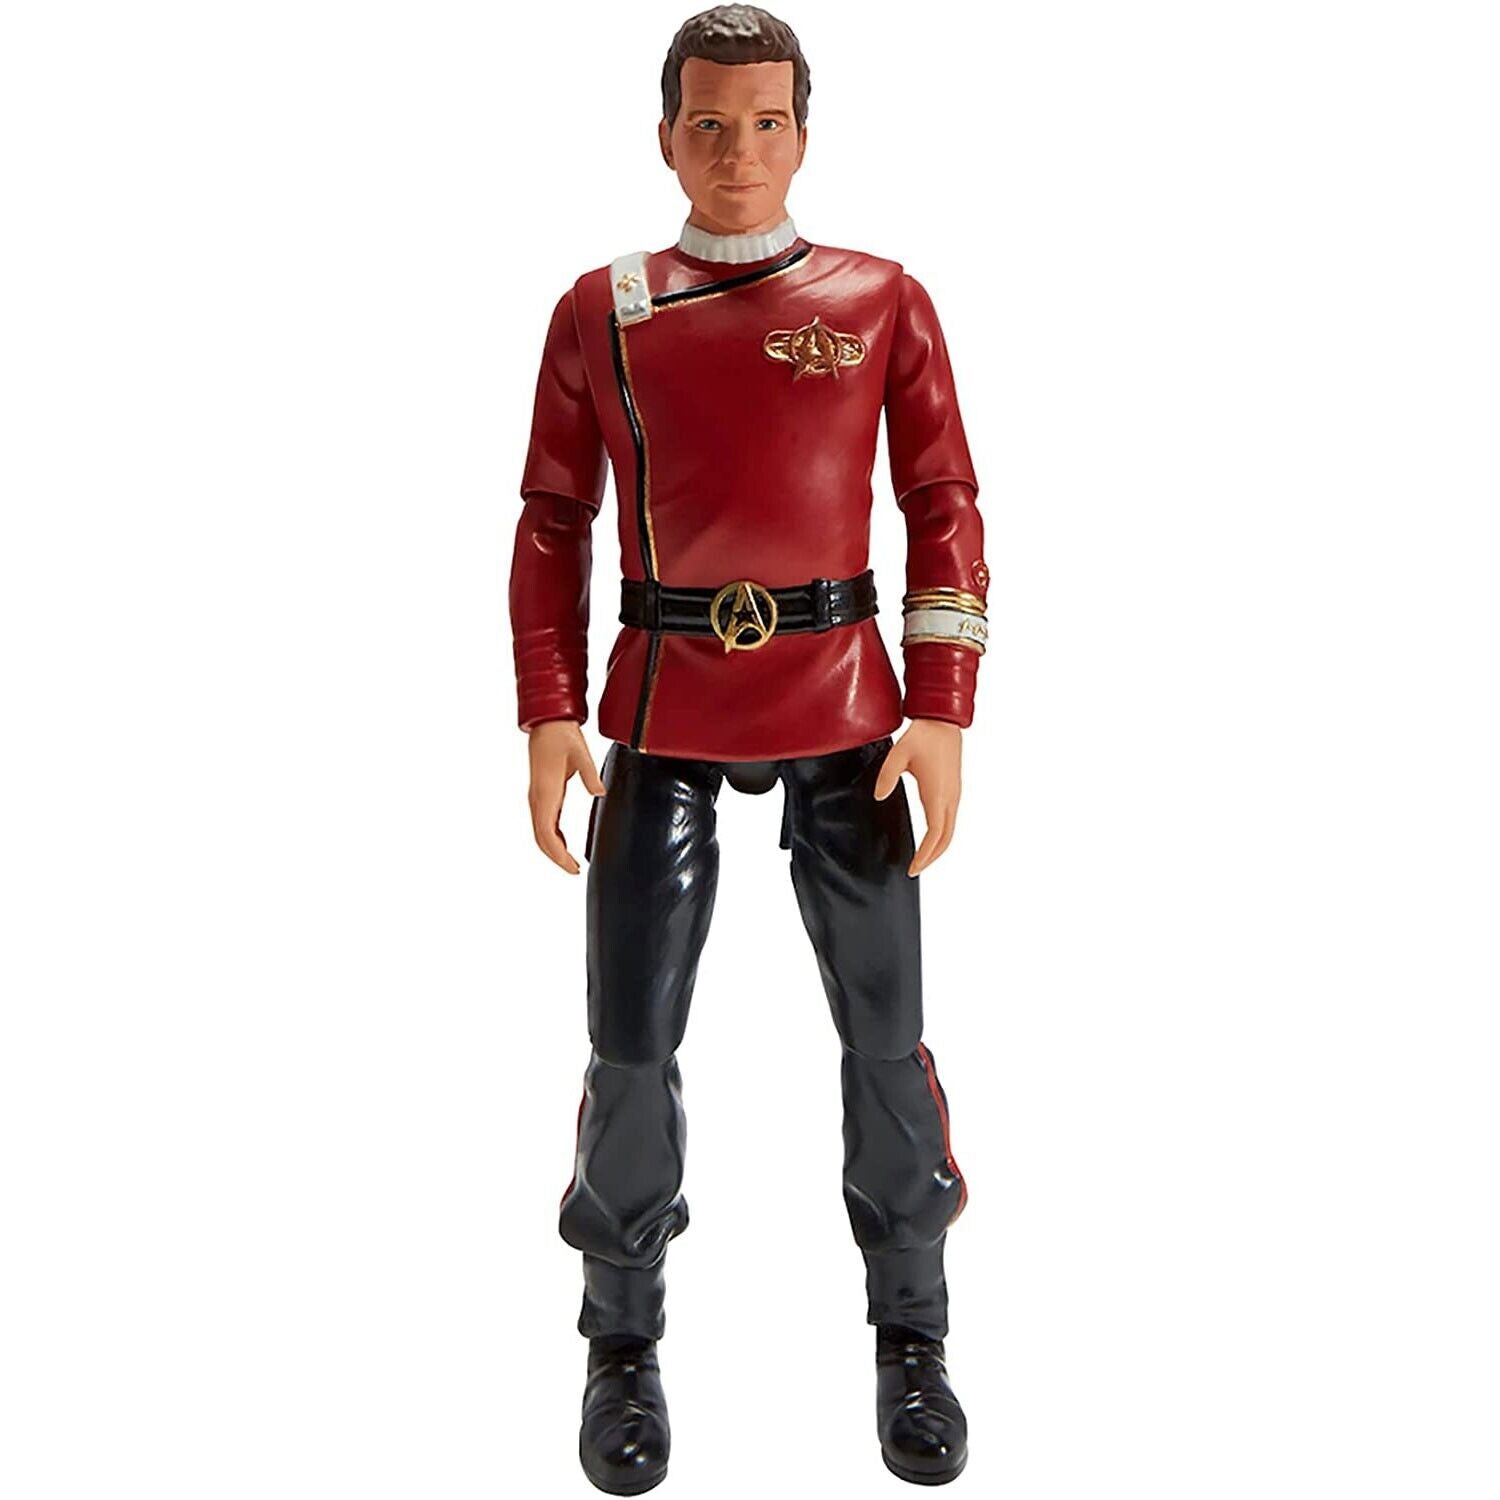 Star Trek Admiral Kirk Figure 5-Inch - The Wrath of Khan Collectible